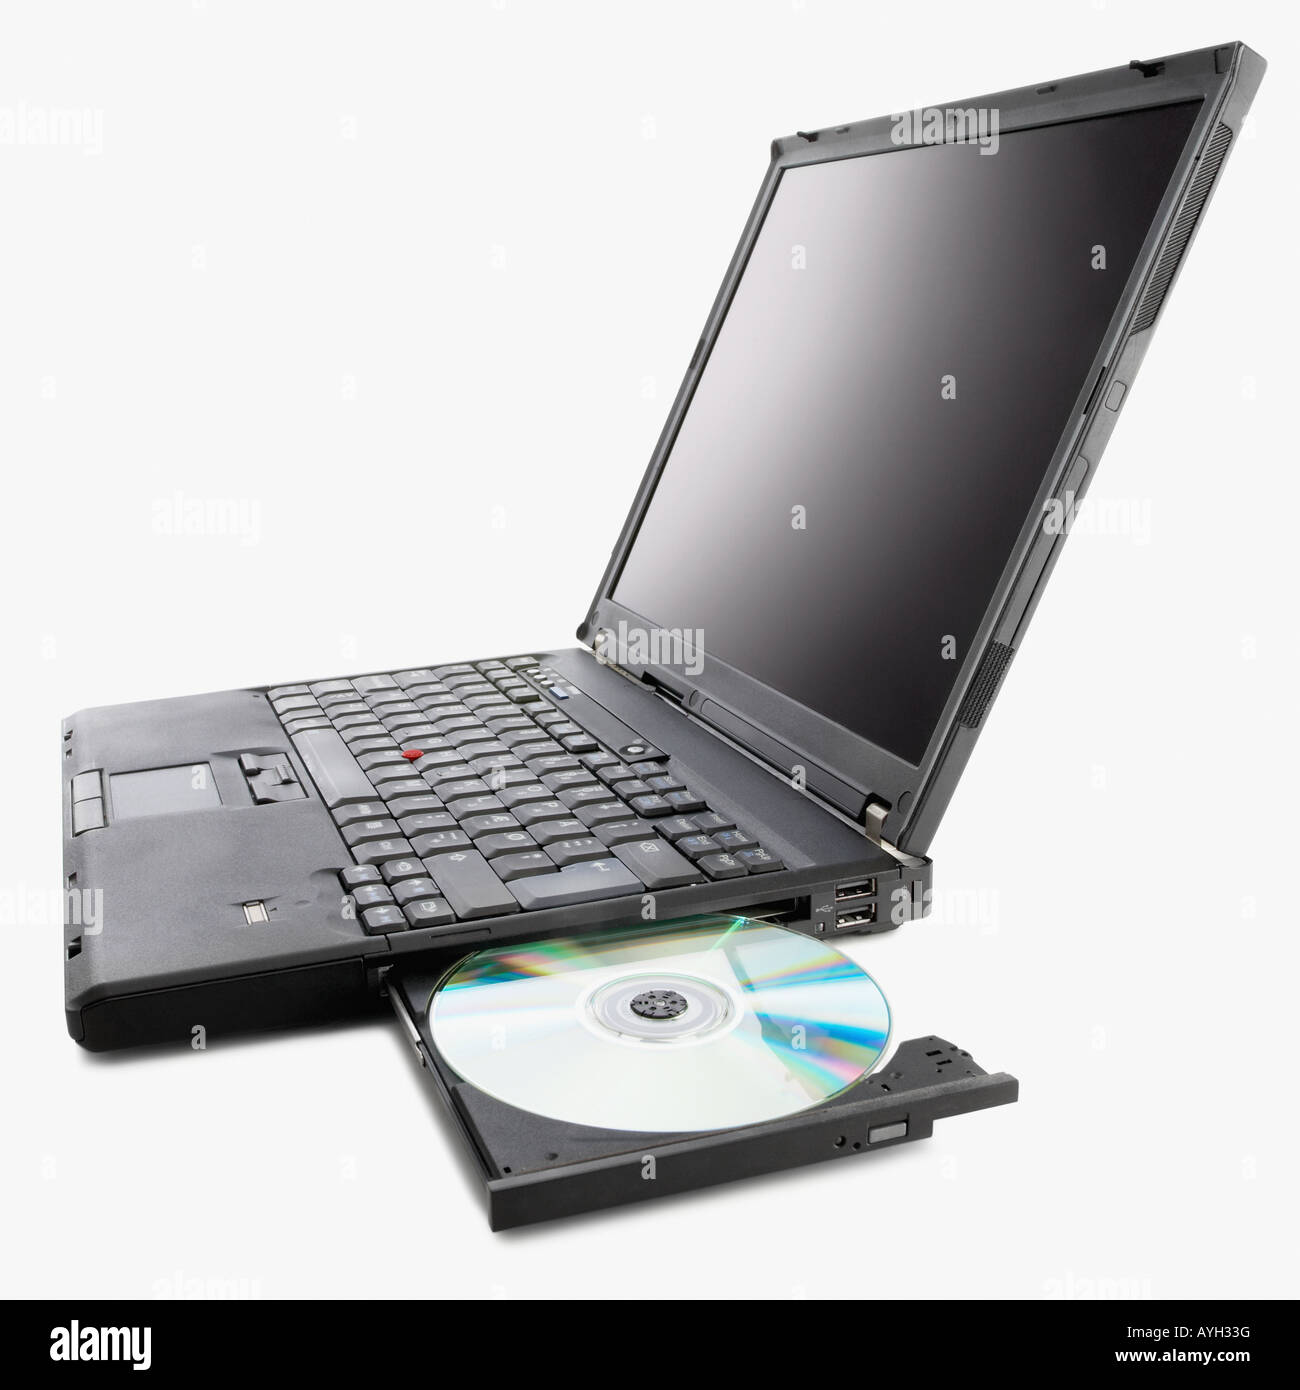 Laptop with cd rom drive open Stock Photo